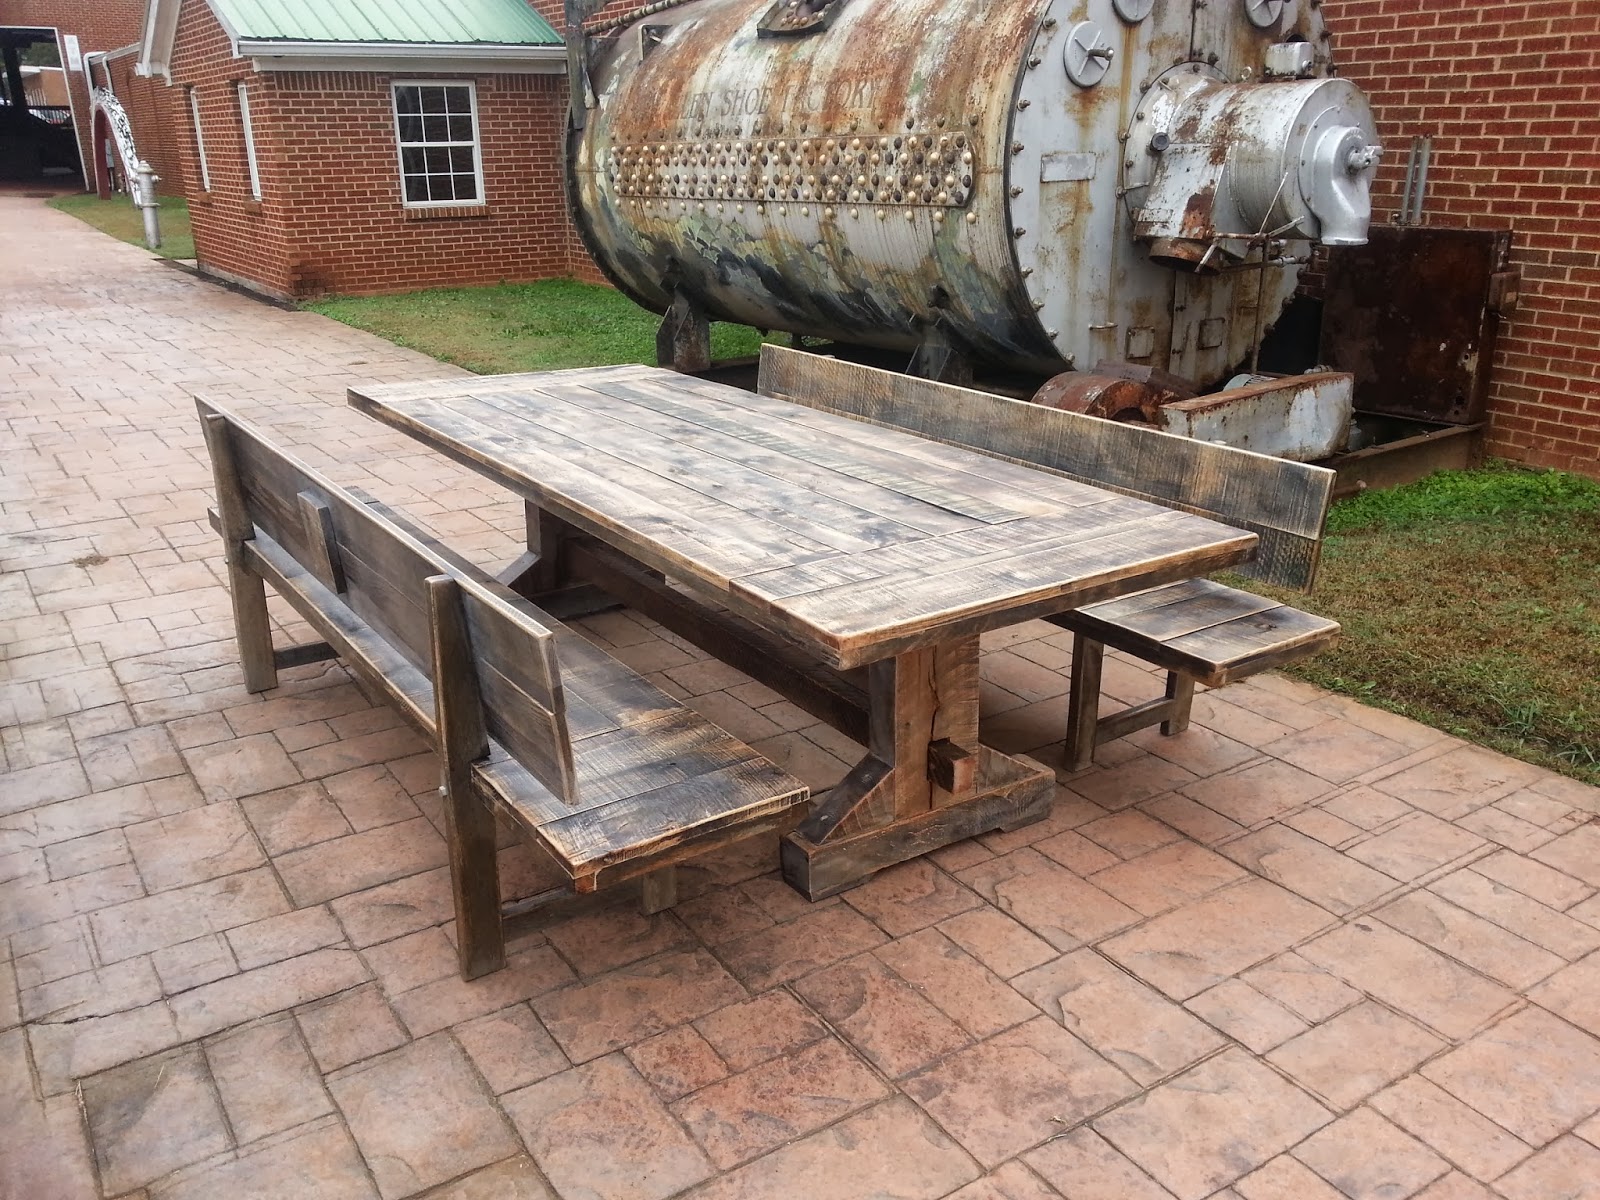  Rustic Tables: The Emerson Rustic, Oak Reclaimed Trestle Dining Table